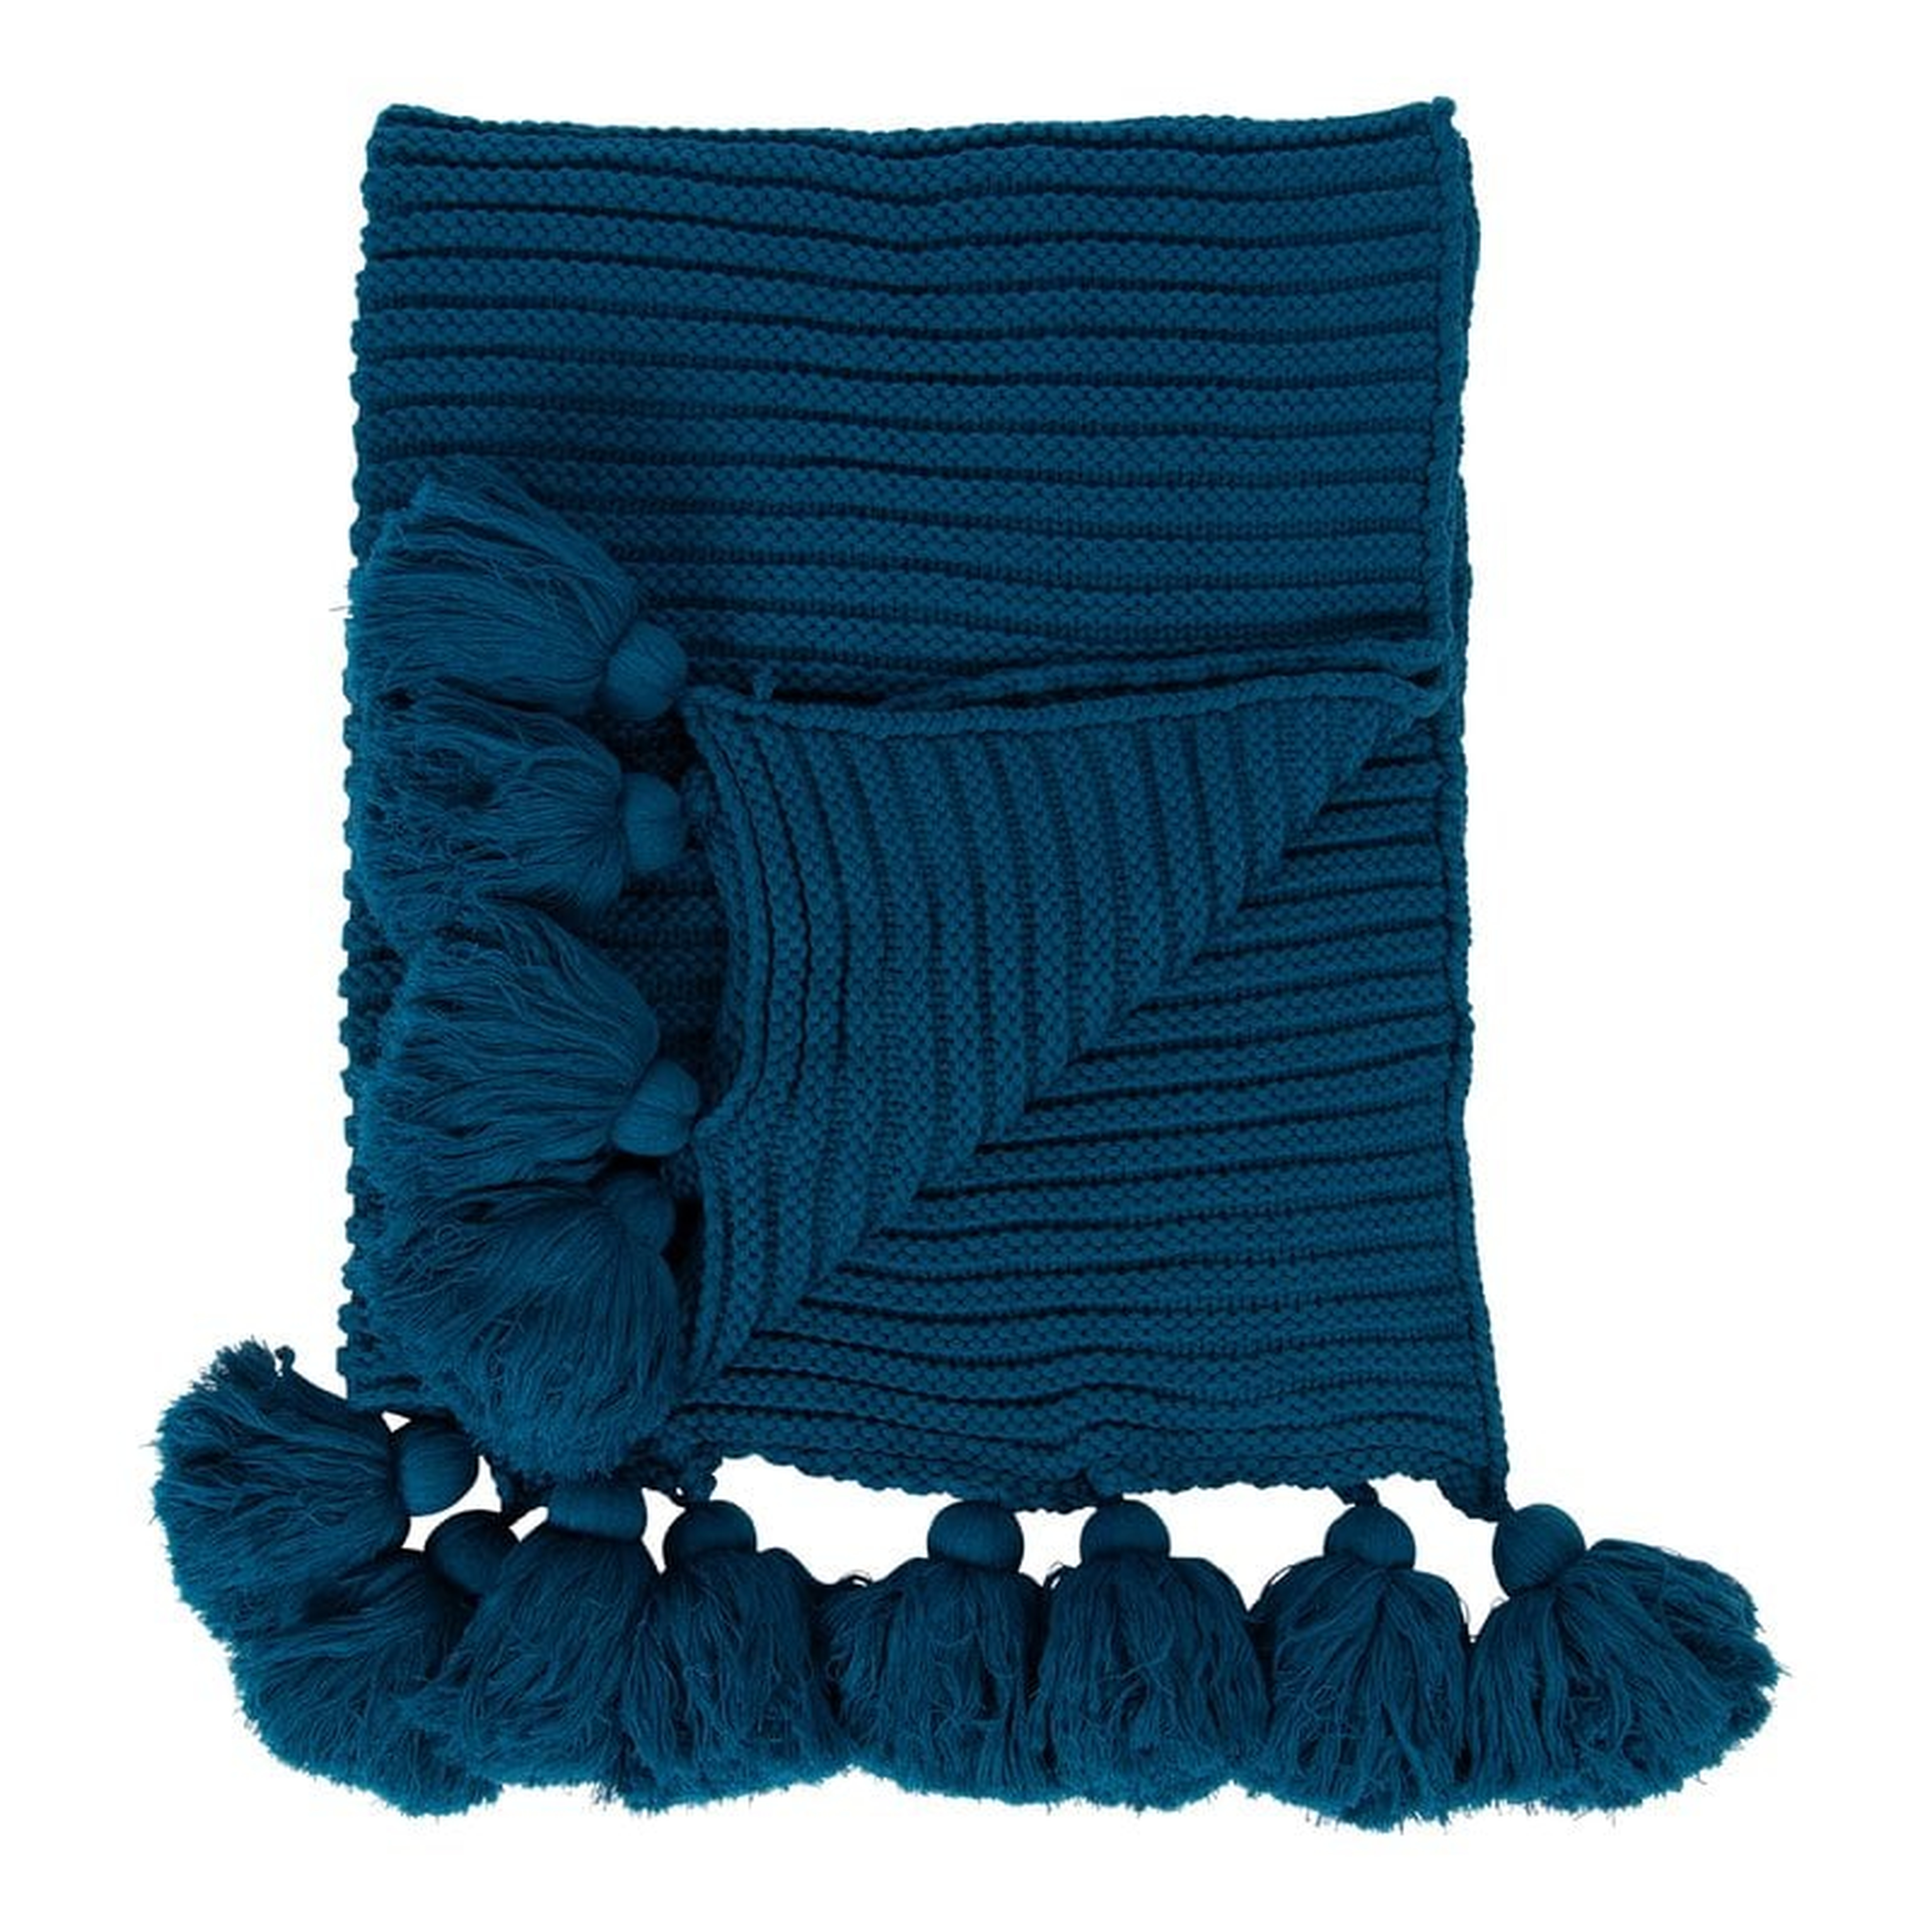 Dorcheer Chunky Ribbed Knit Throw Blanket See More by August Grove - Wayfair